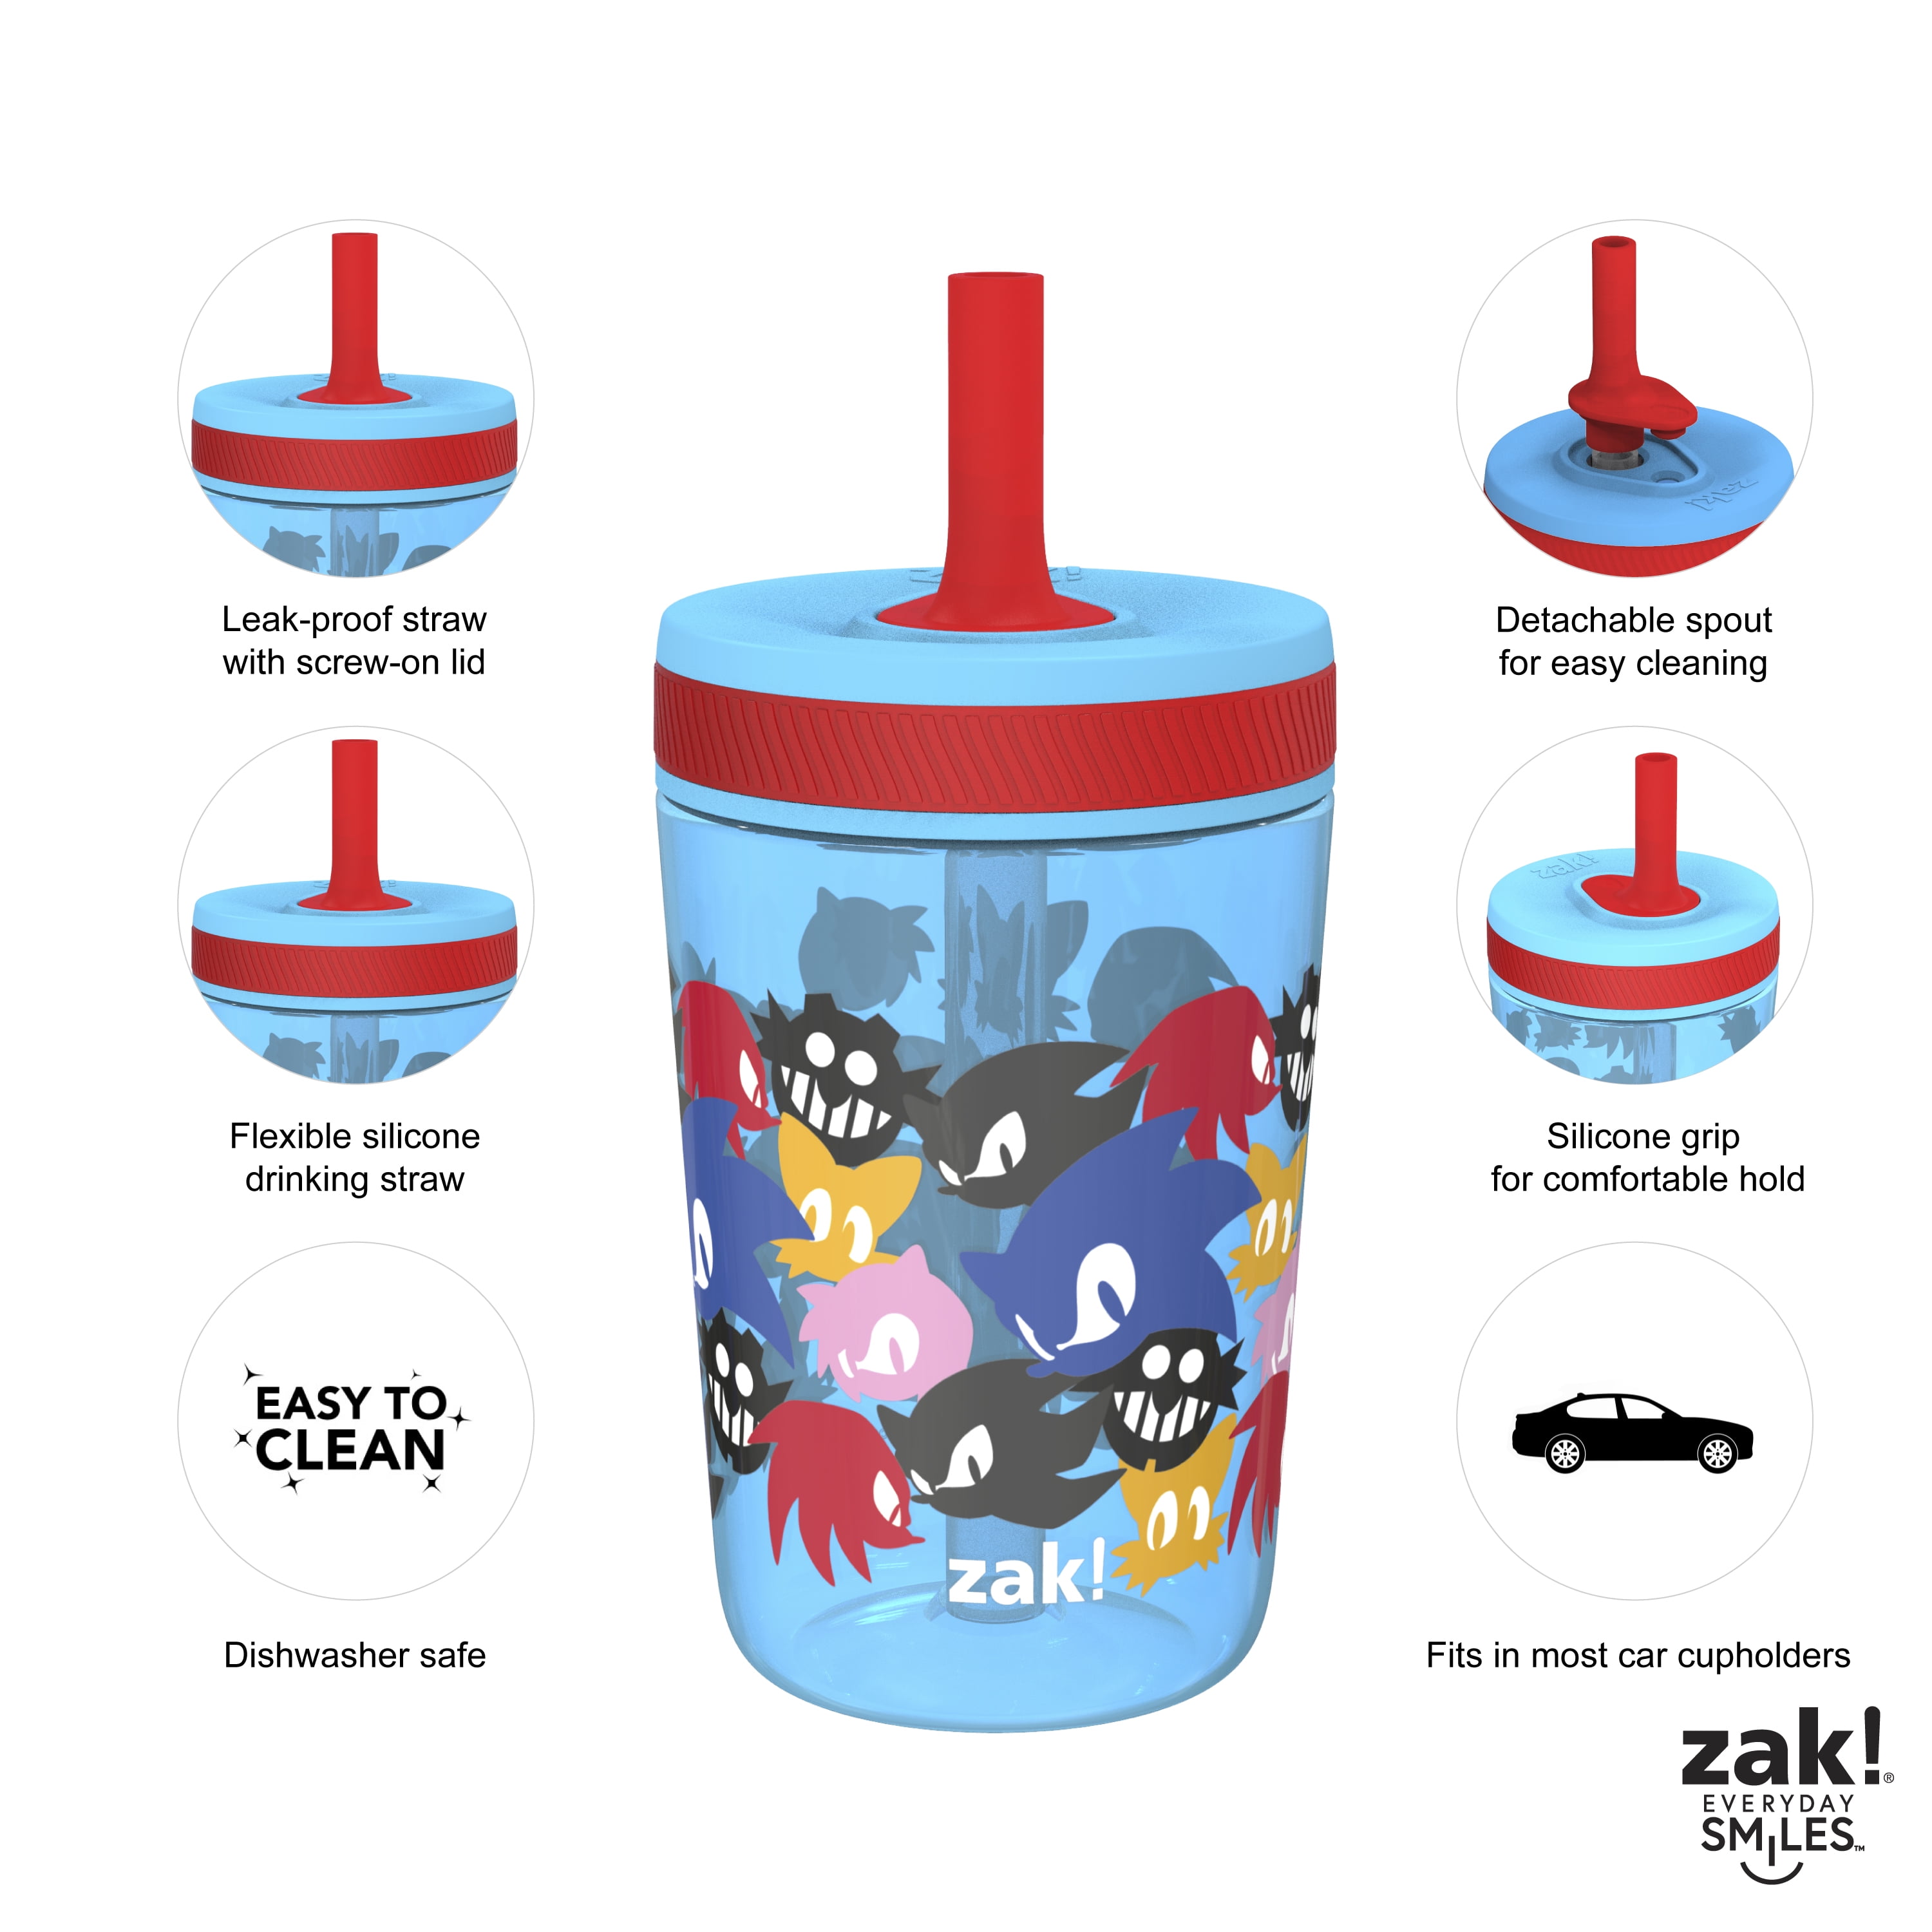 Replying to @its.slimshaedy Here's my hack for the Zak straw cup